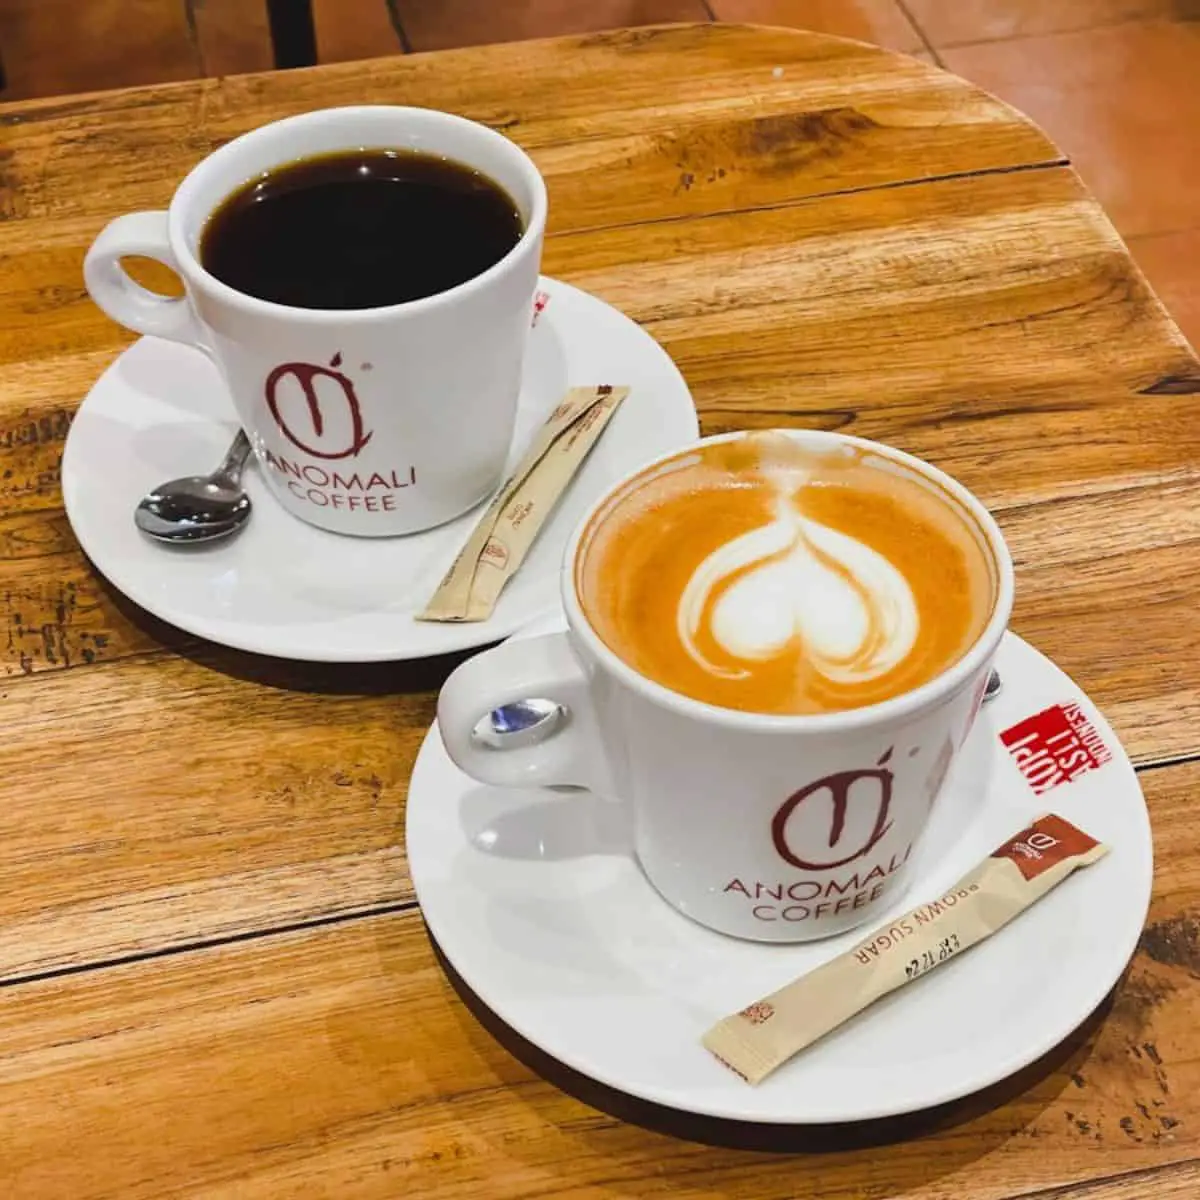 Cikuray brew coffee and Bali latte Anomali Coffee best cafes in Bali